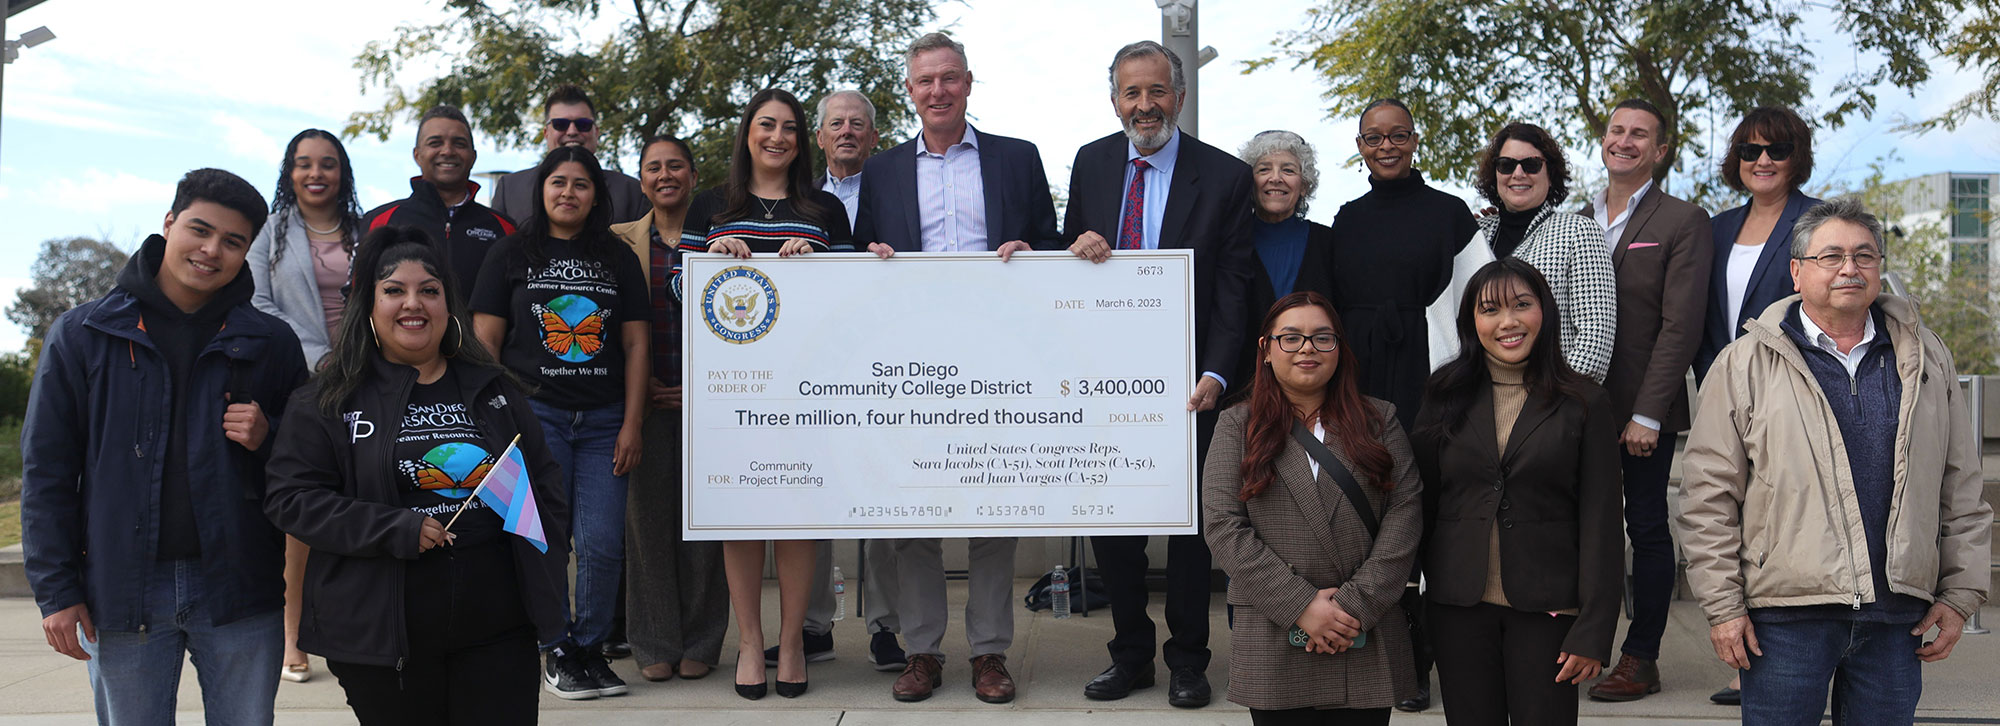 A group photo with the representives, district officials and students with a giant check for 3.4 million dollars